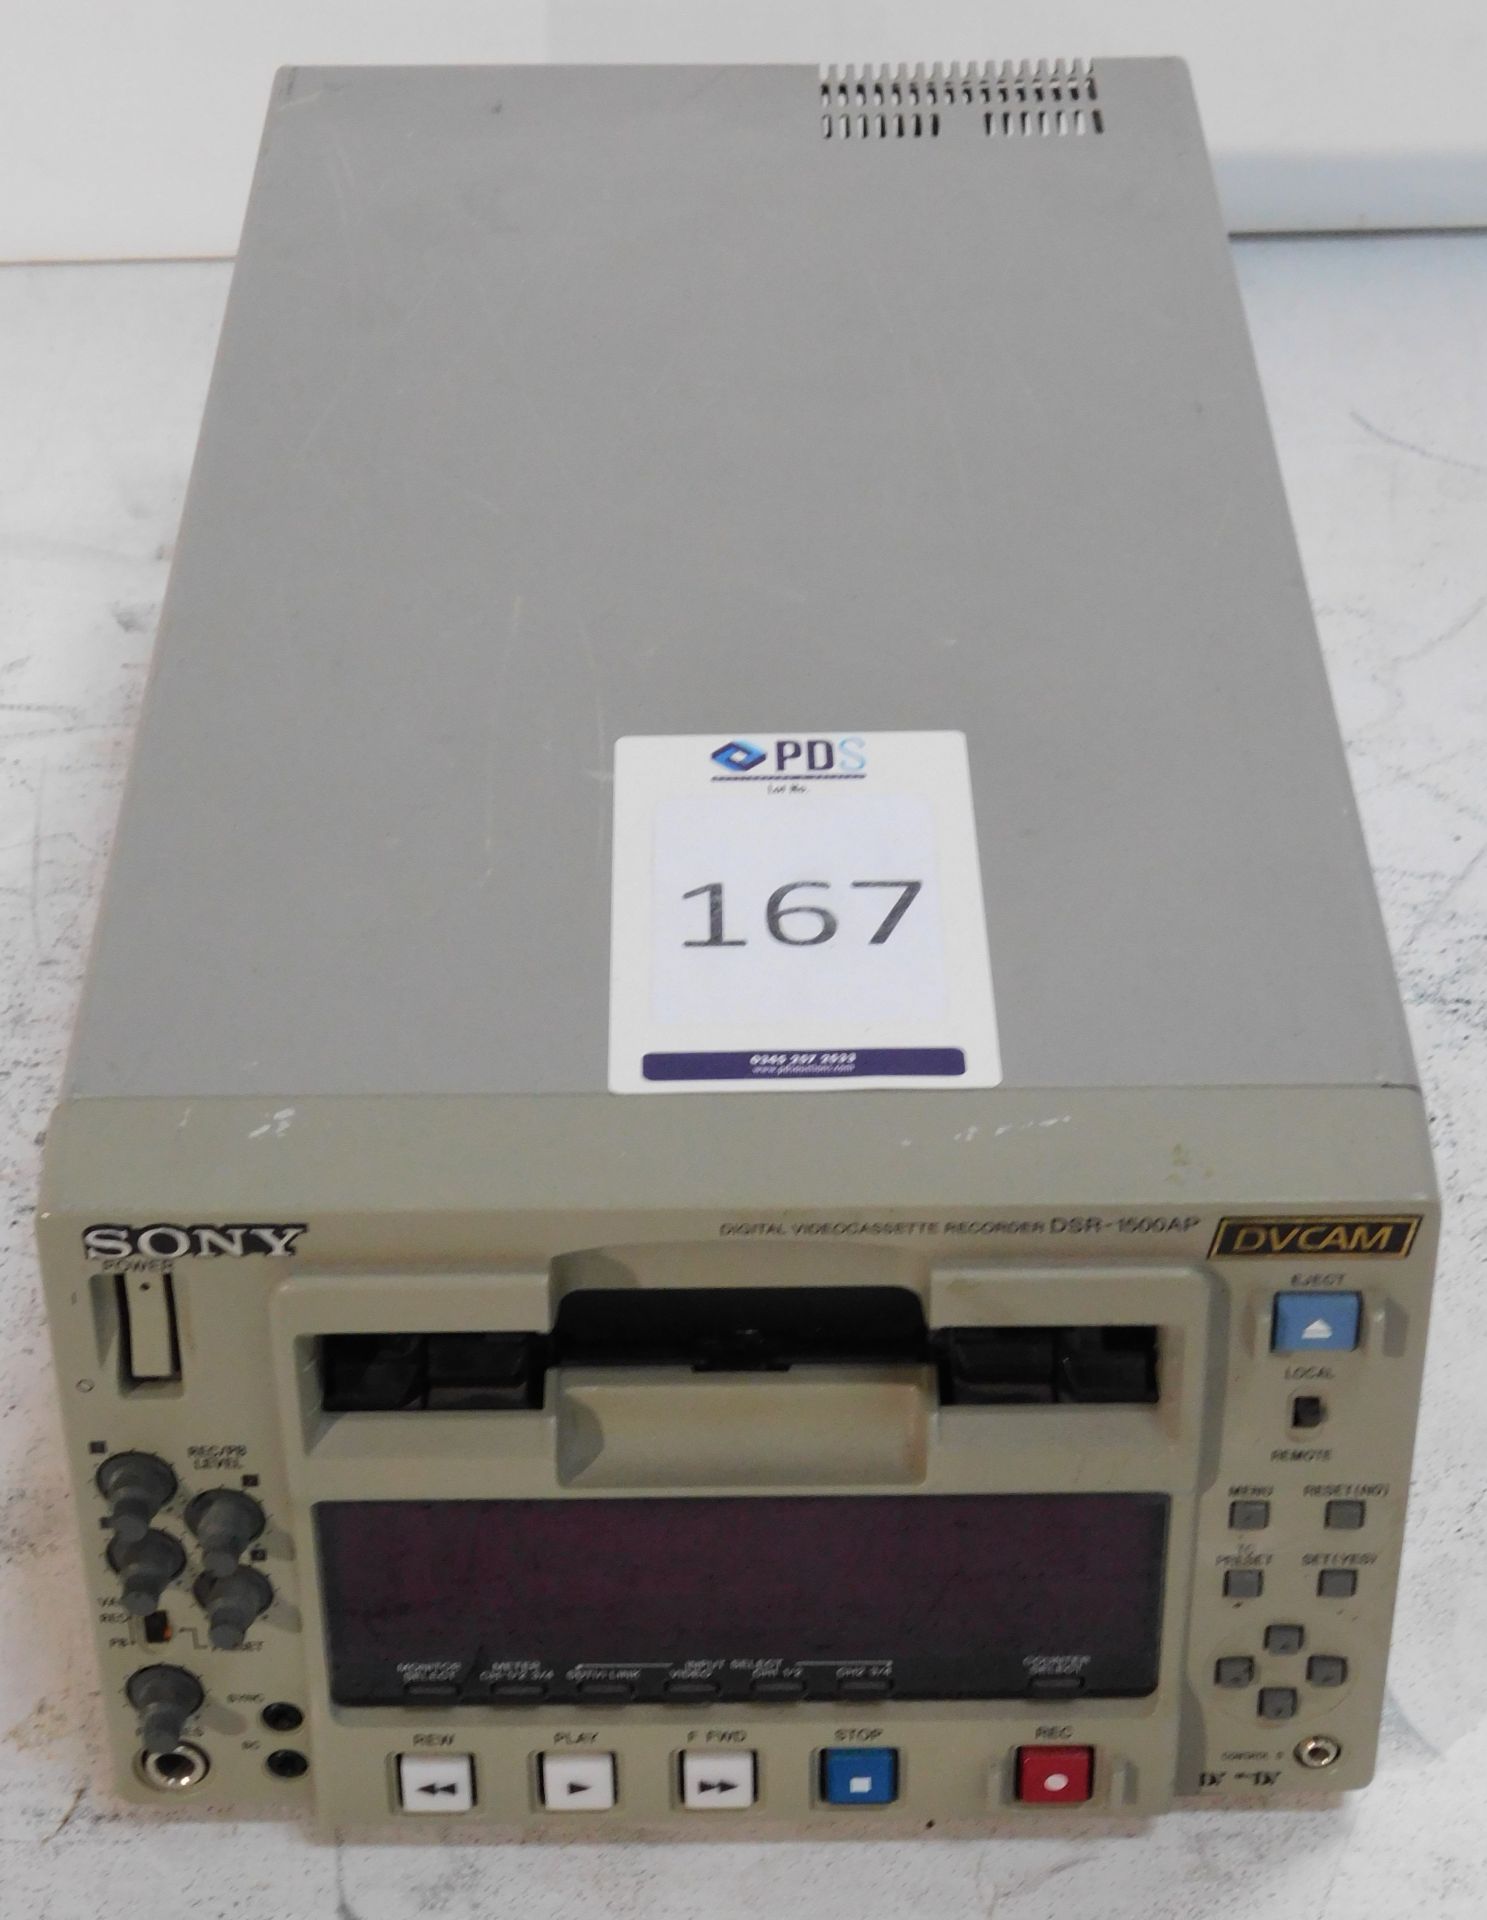 Sony DSR-1500 AP Digital Video Cassette Recorder (Location Brentwood. Please Refer to General